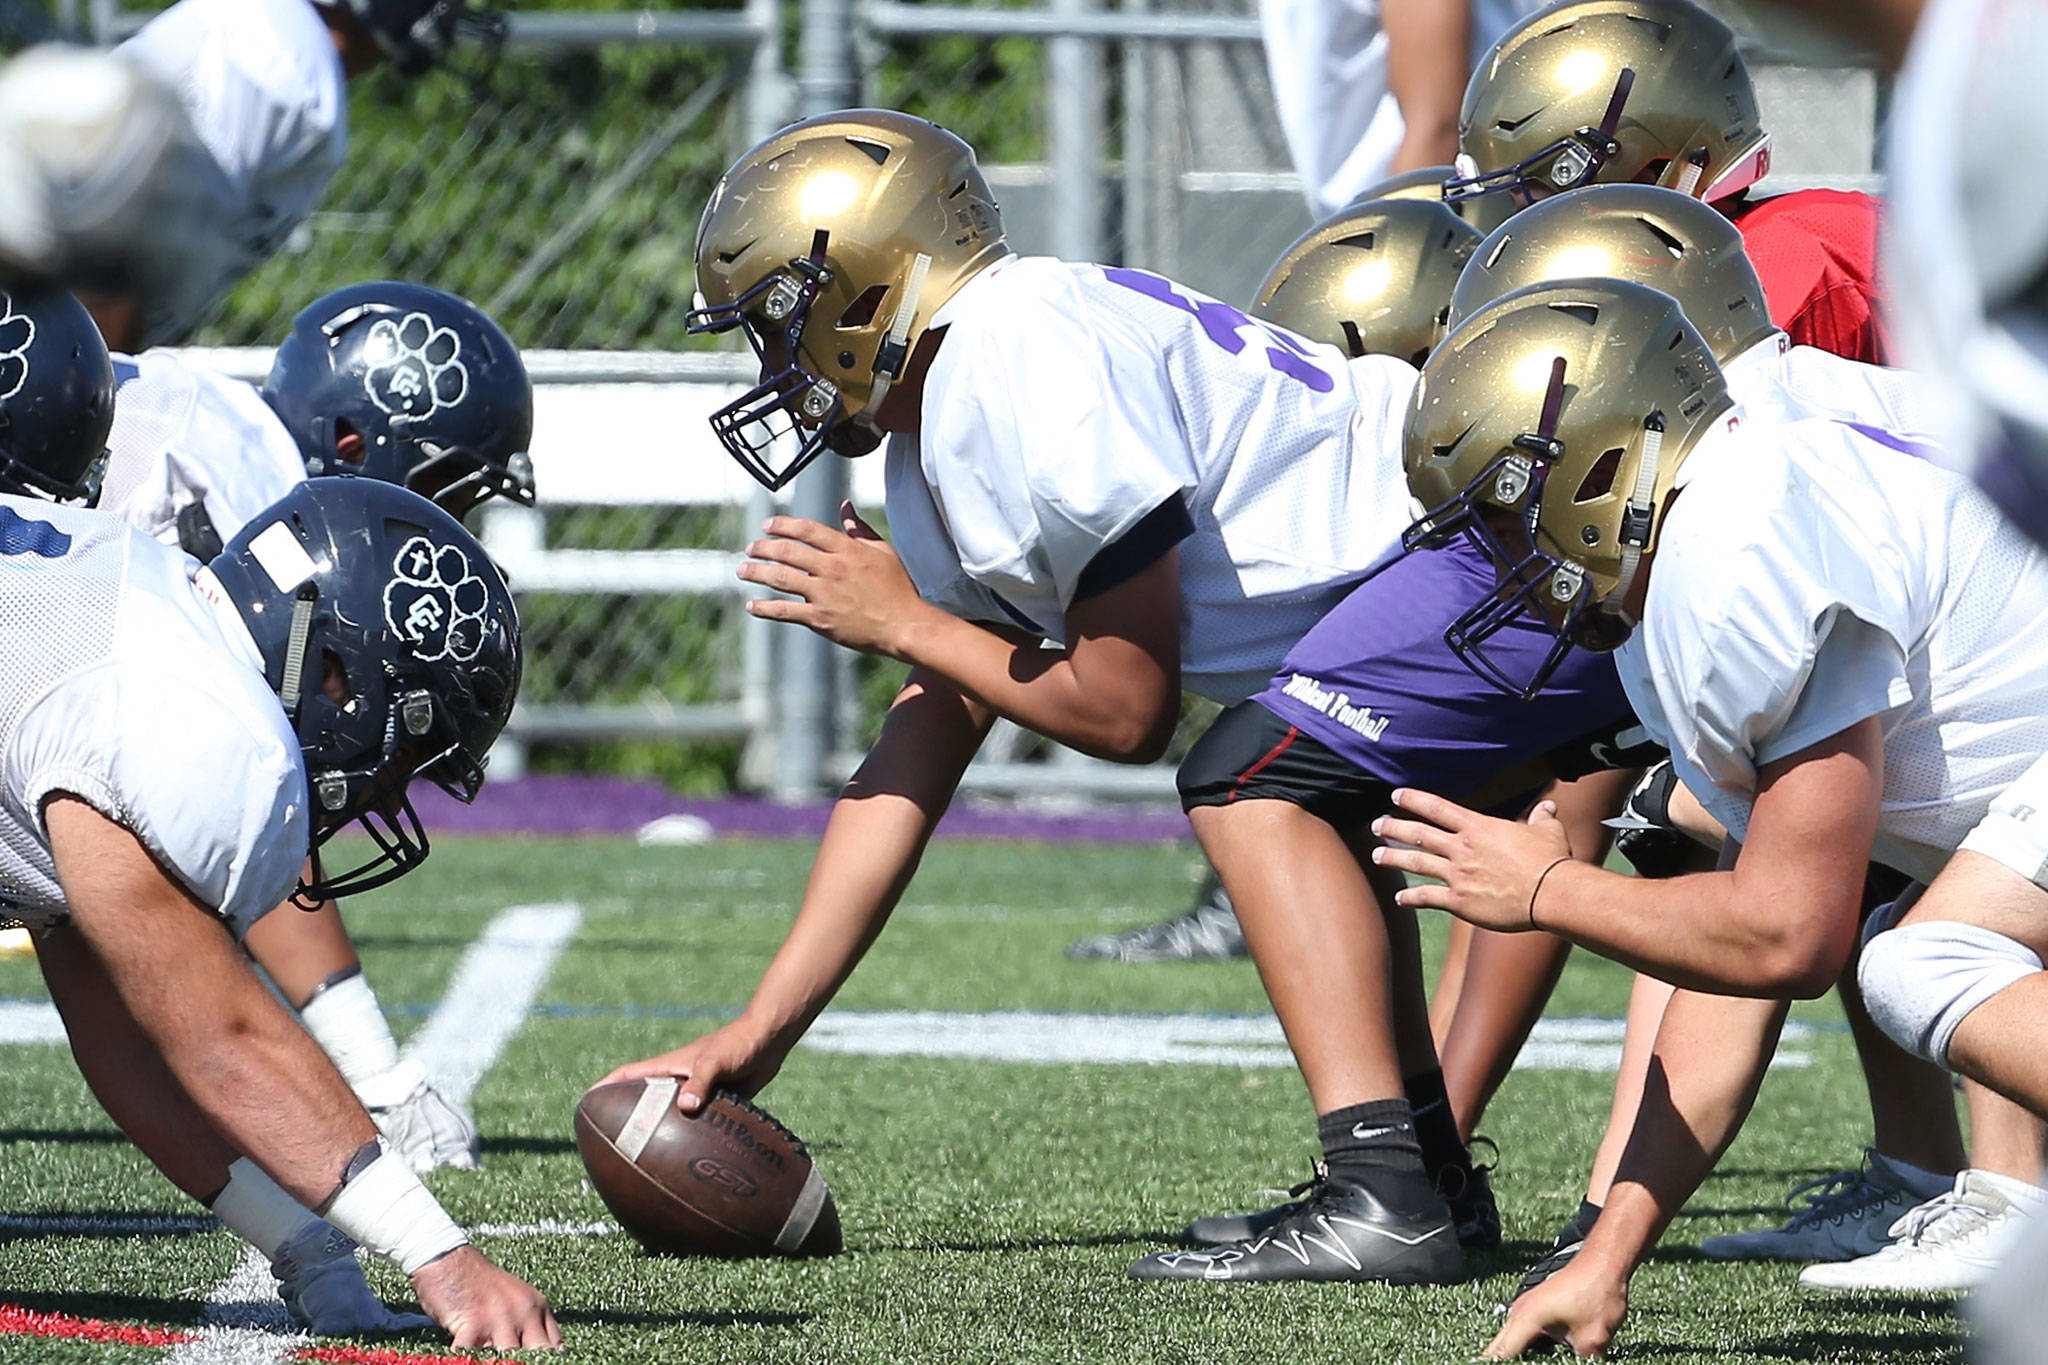 Center Weston Whitefoot and the offensive line size up the defense. (Photo by John Fisken)